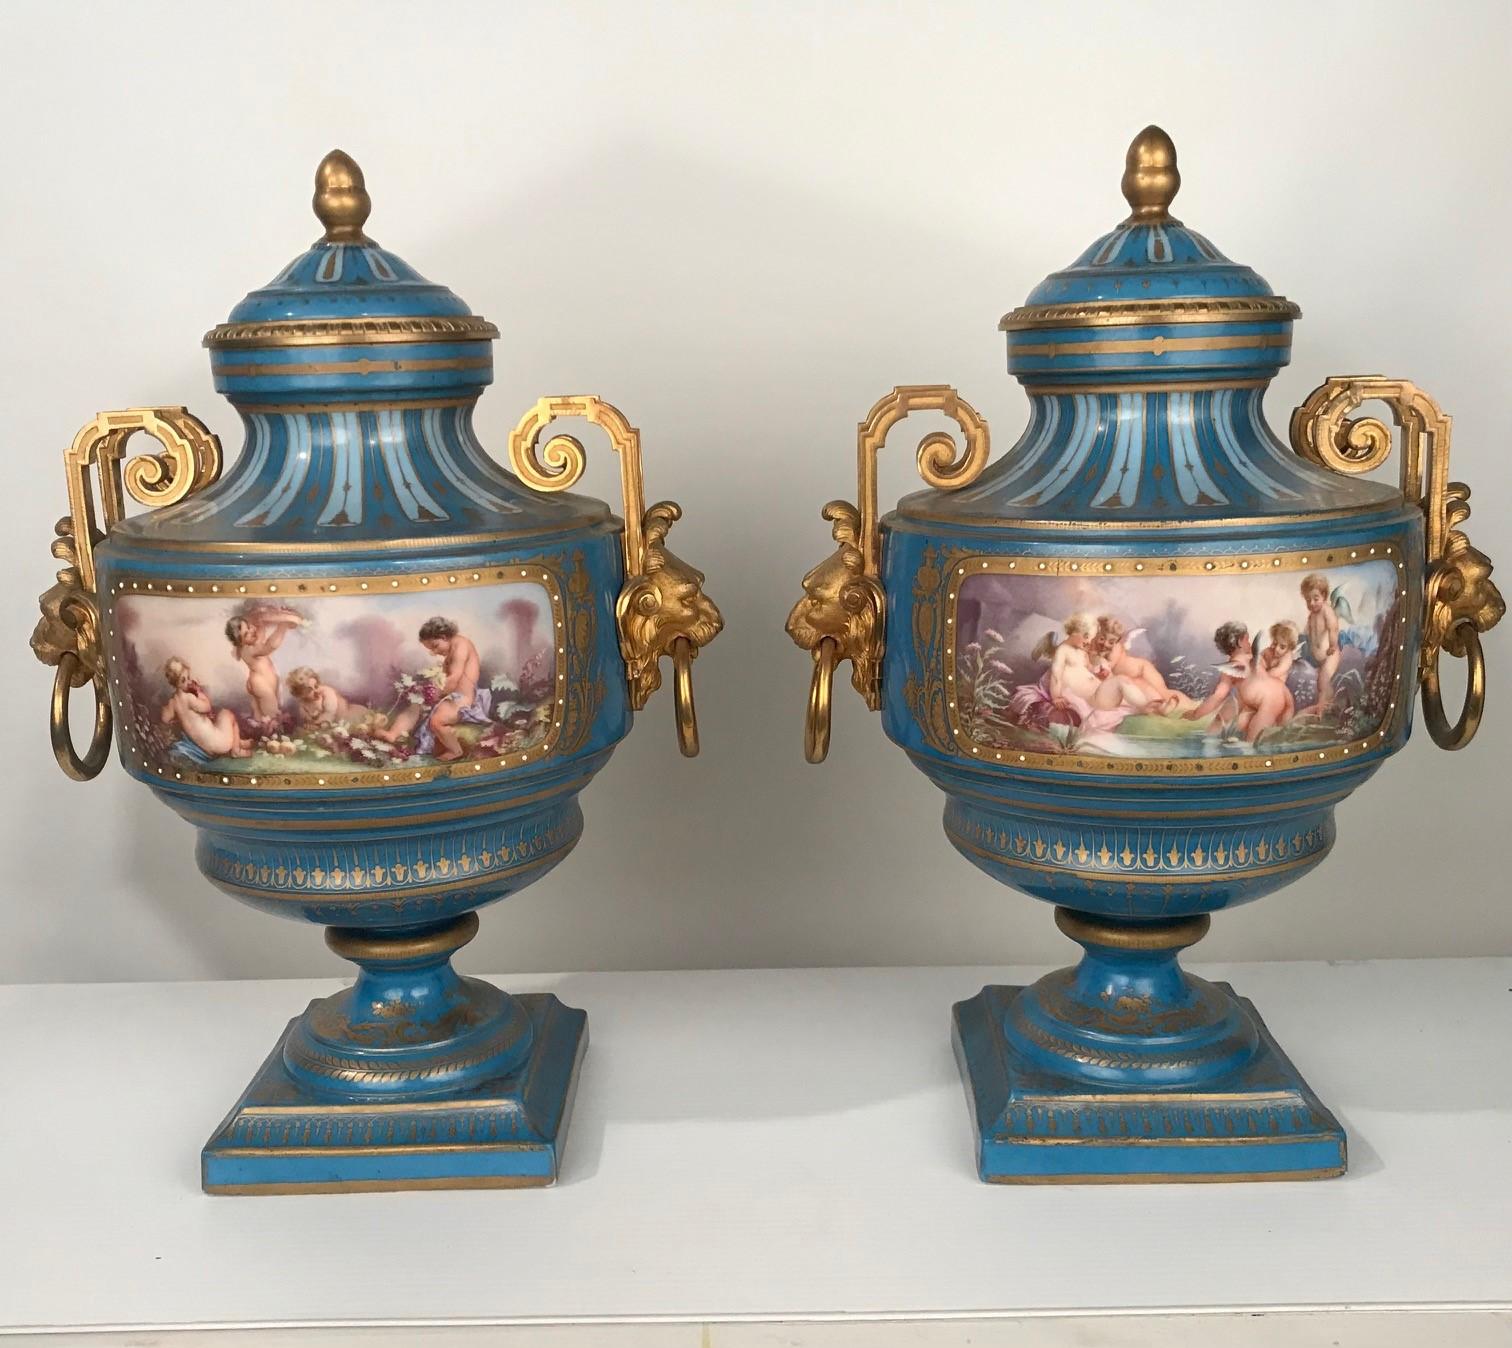 These are large, French and of excellent quality. From acorn finials to square stepped bases, this pair exude quality unmistakably. They have the de luxe look of items from the Belle Epoque. The vignettes show on one side putti bringing in the grape